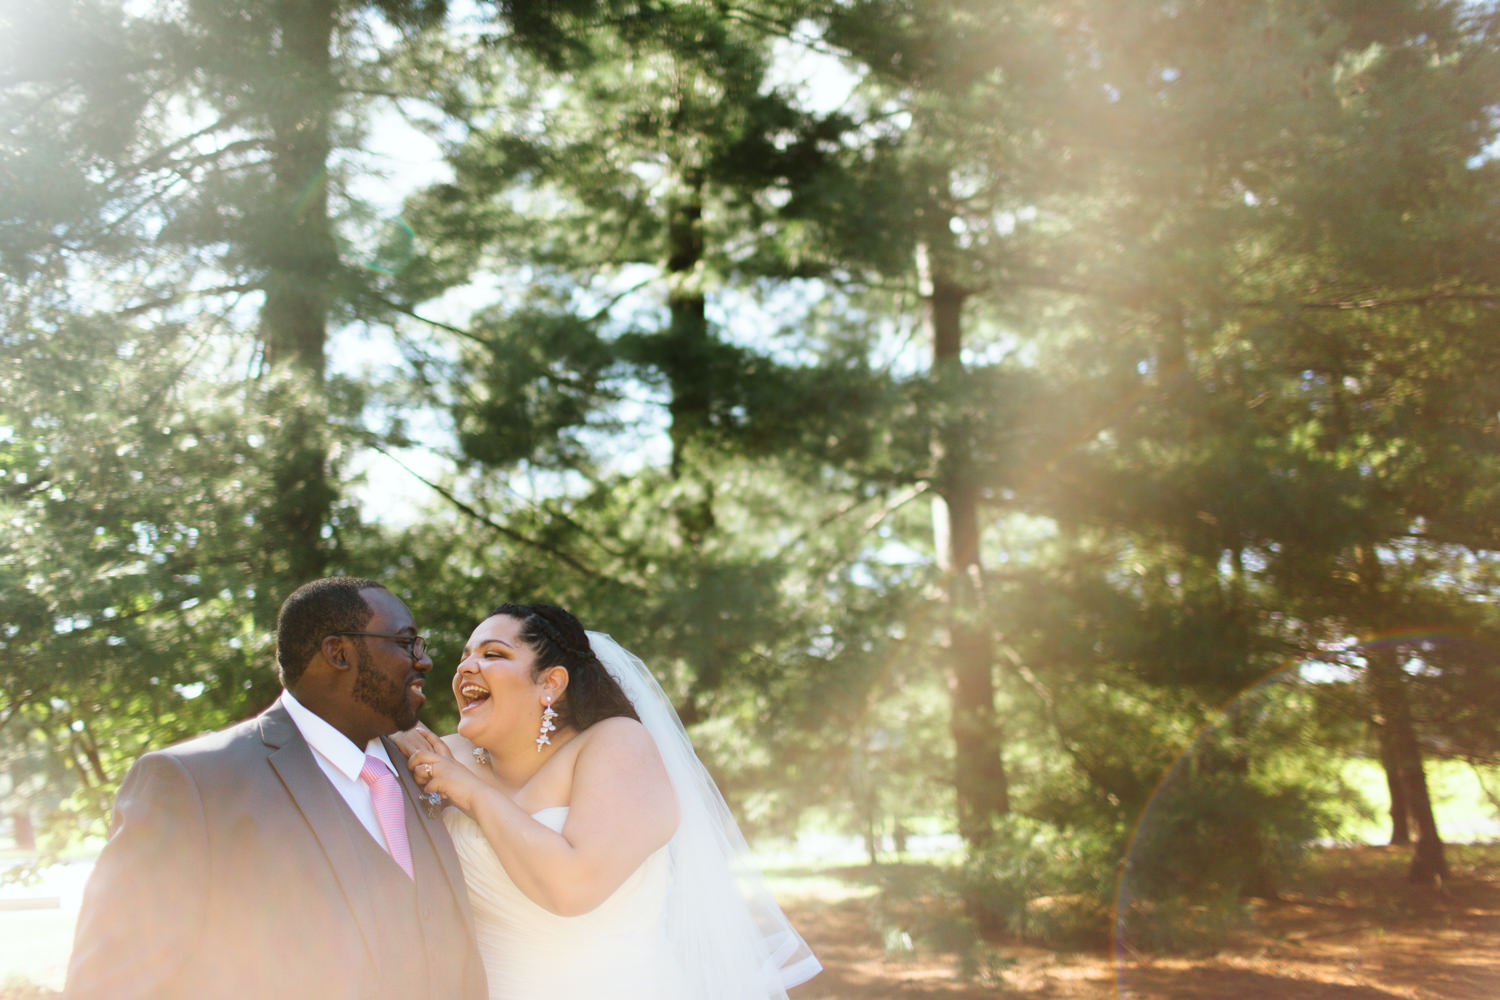 A wedding coupe laugh and smile in the forest.